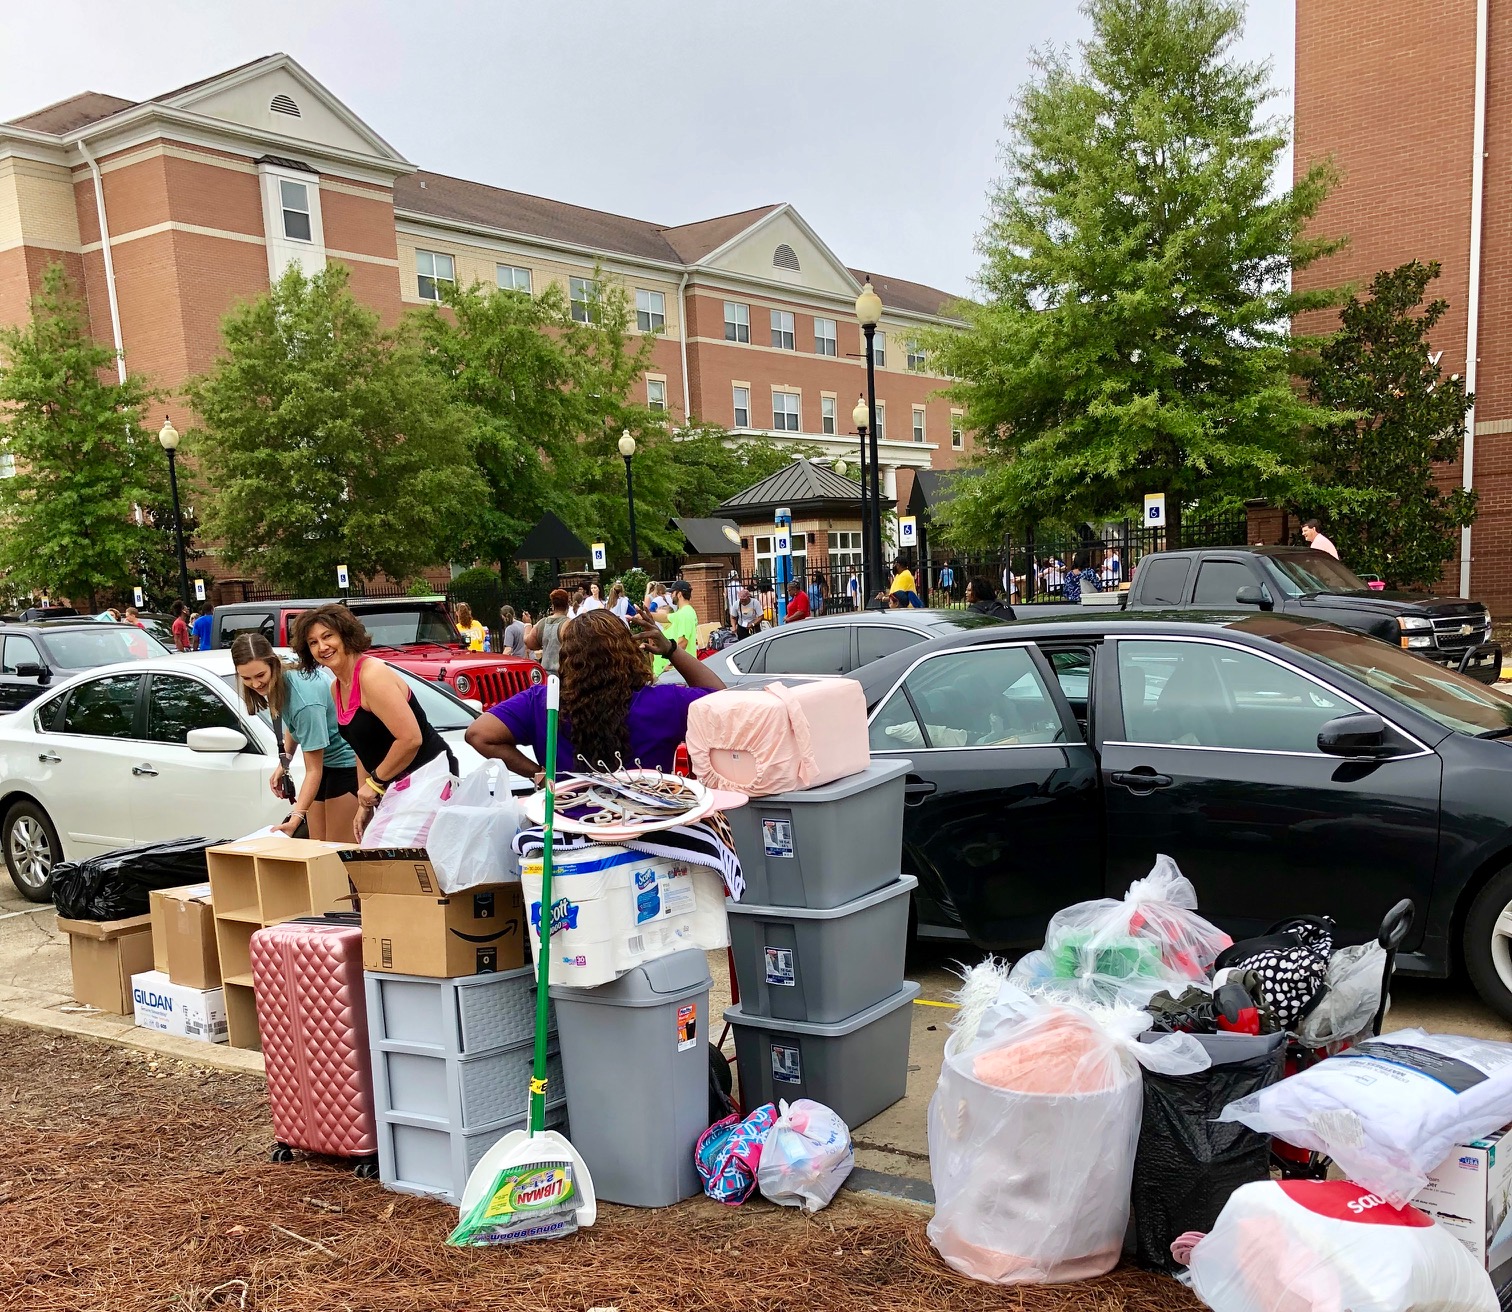 Students unloading their cars for Move-In Day